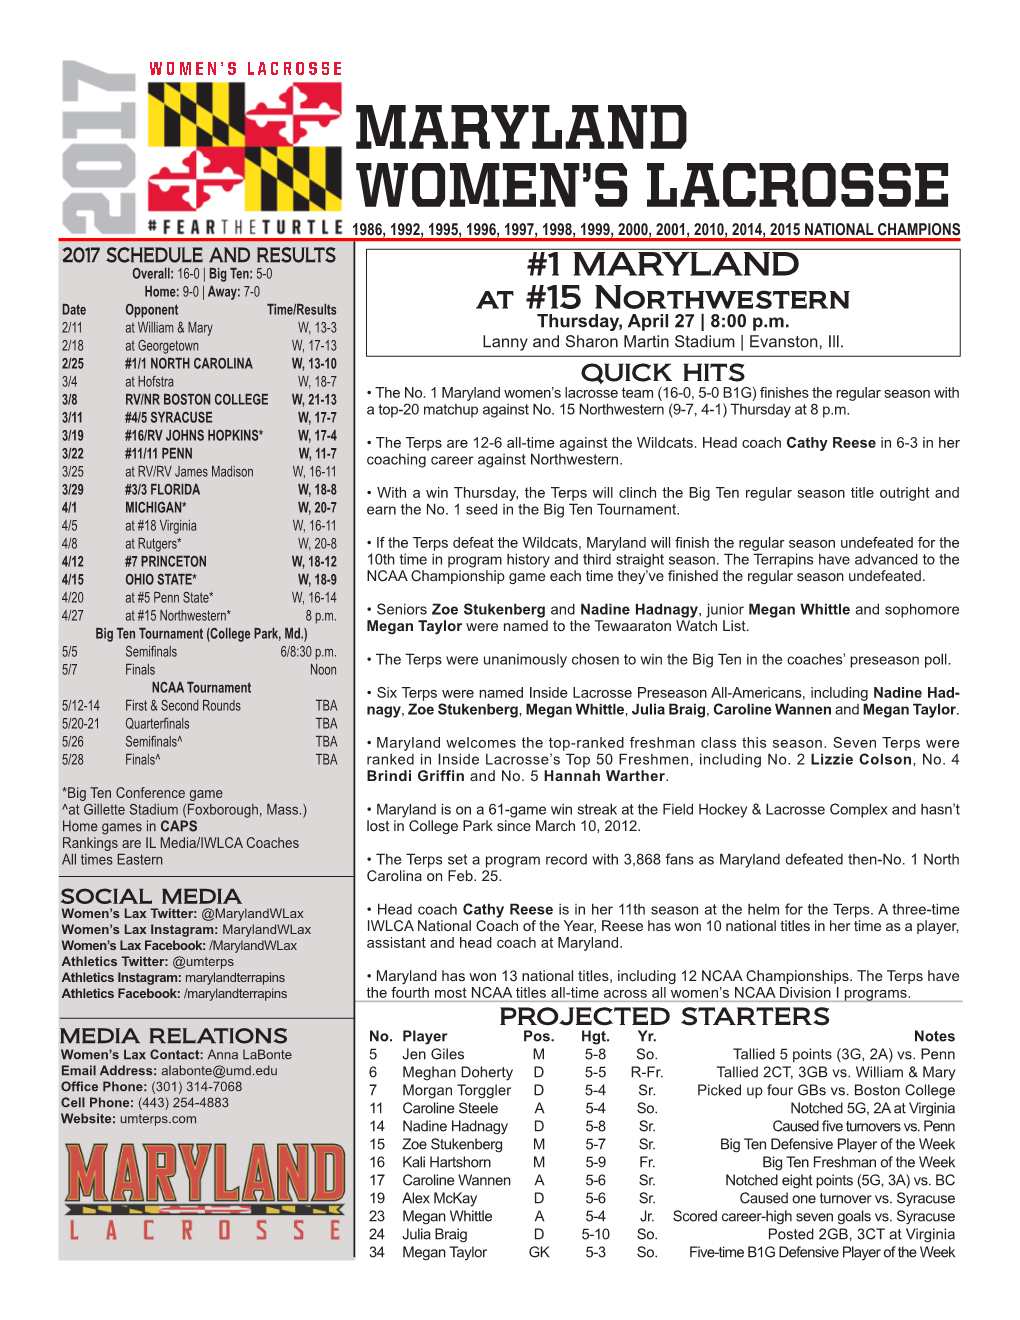 Maryland Women's Lacrosse Maryland Combined Team Statistics All Games (As of Apr 21, 2017)